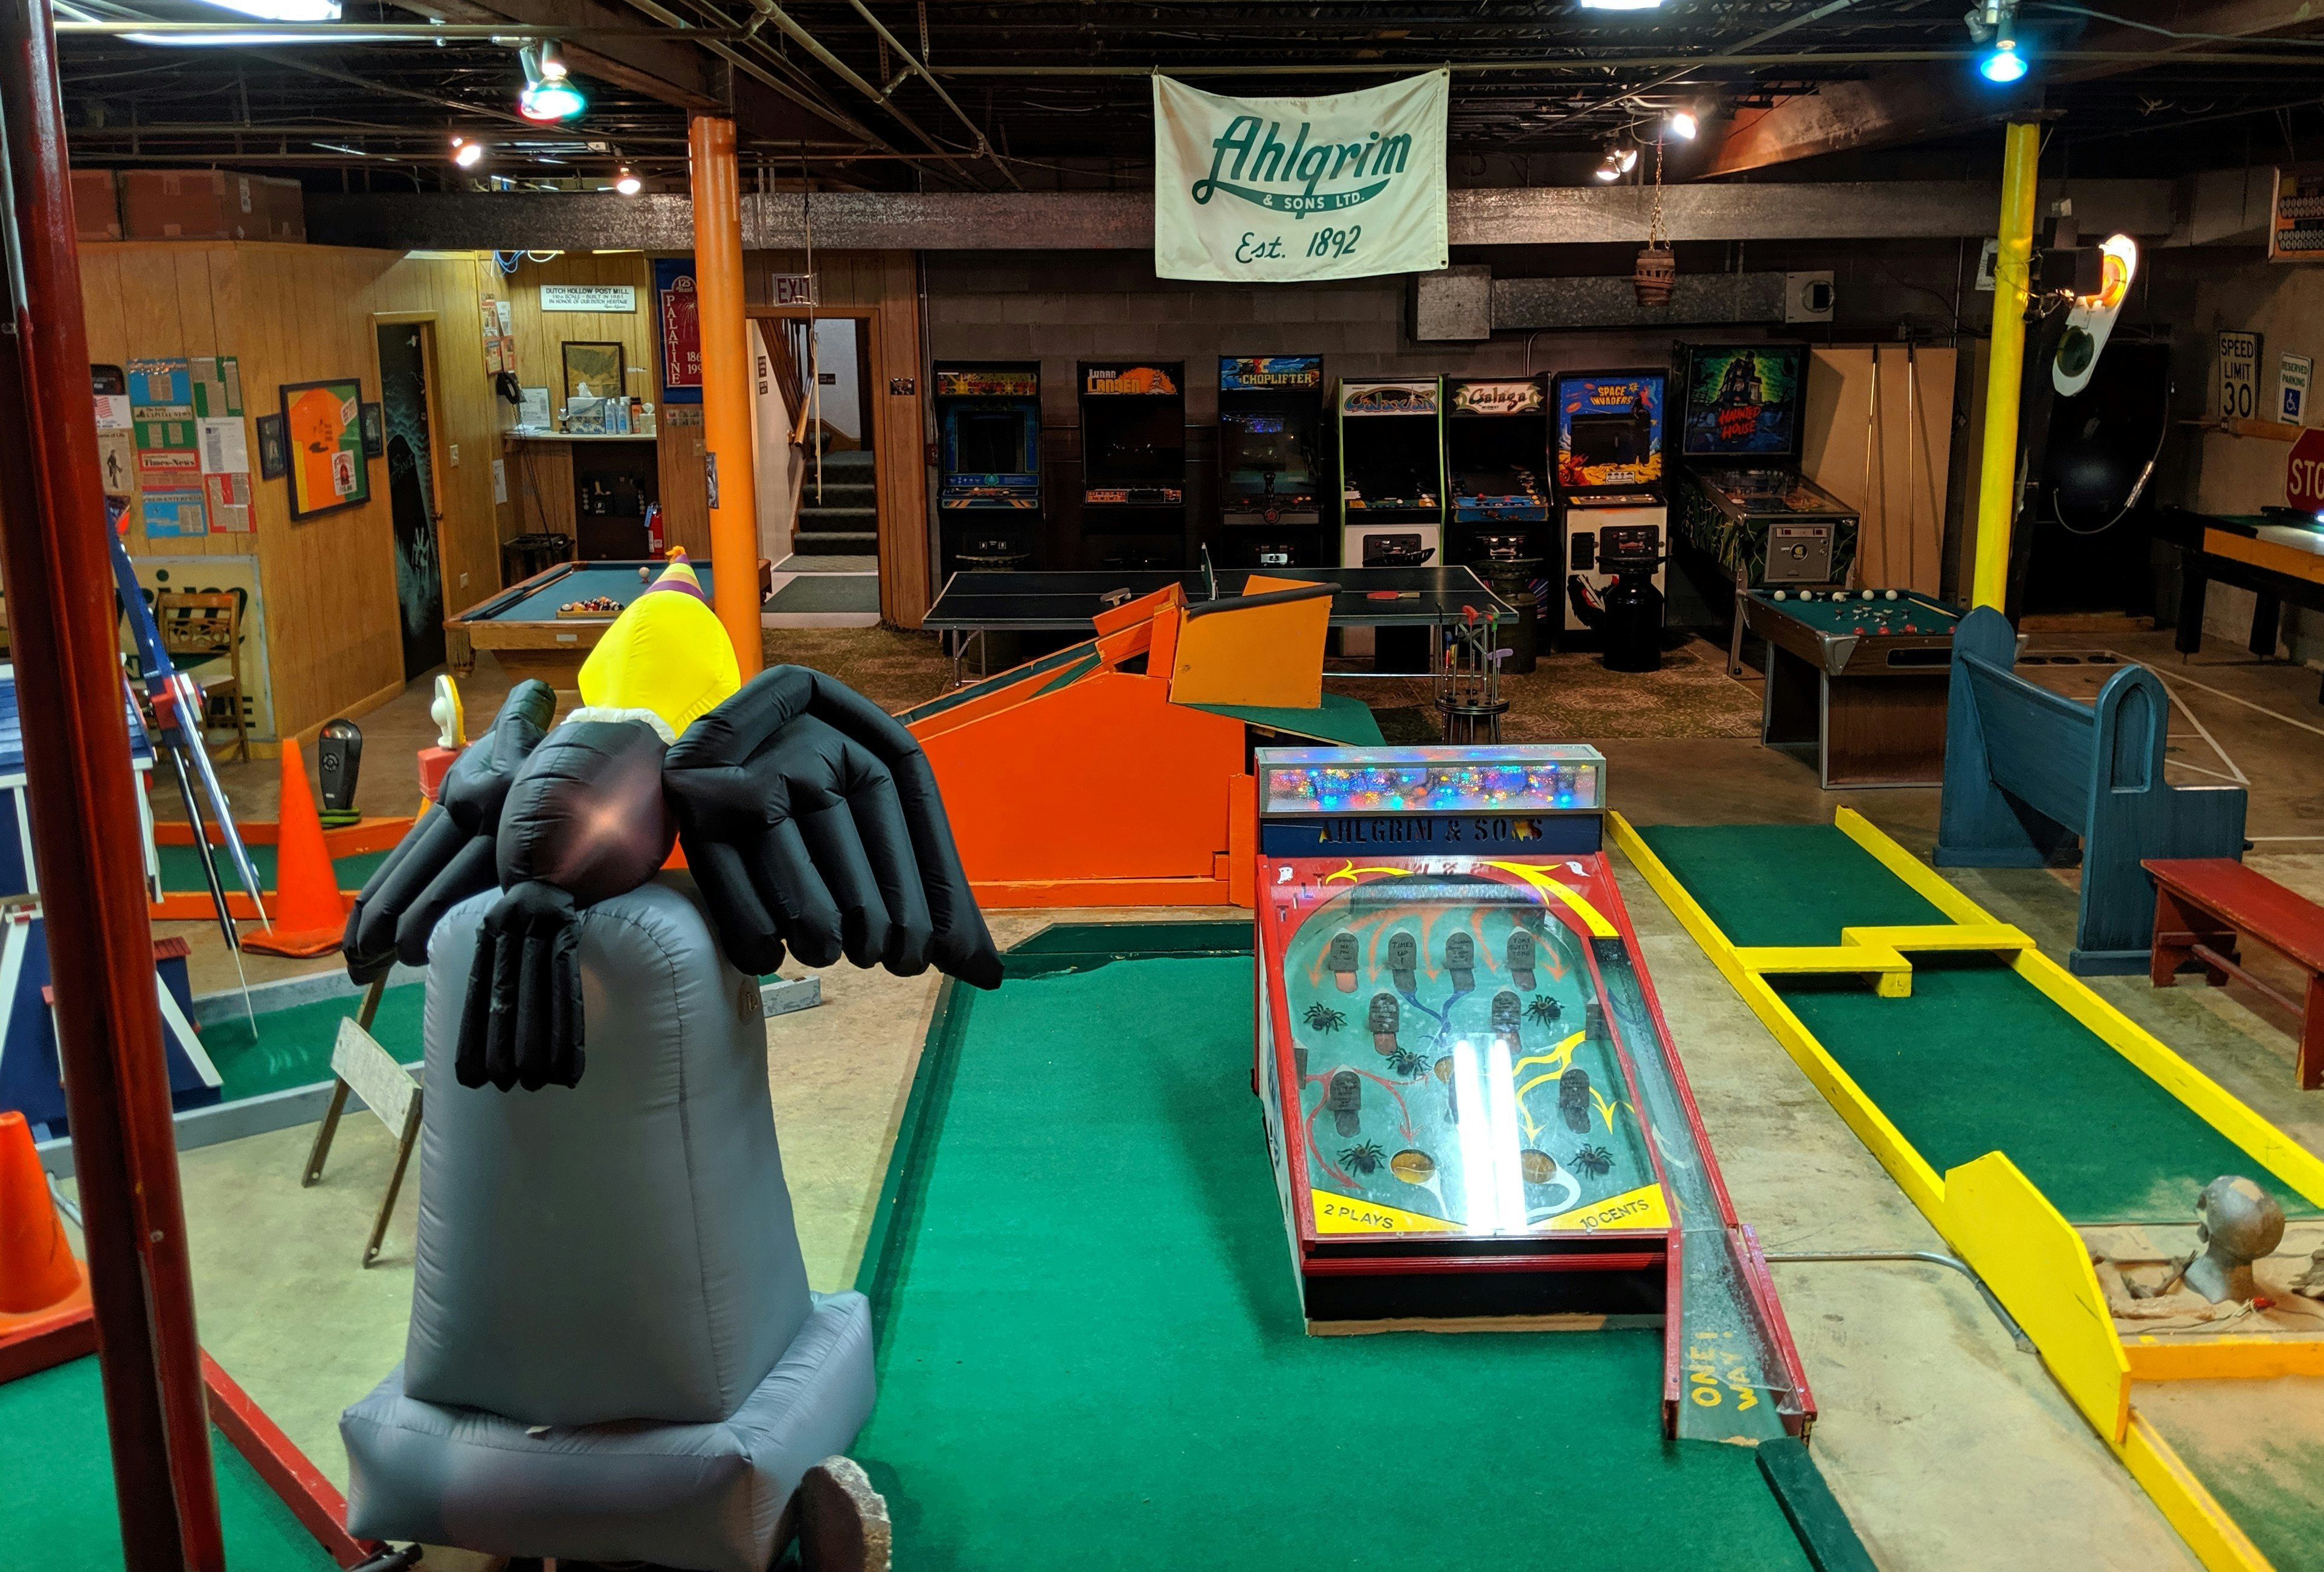 Ahlgrim Funeral Services mini golf course, which is located in the businesses' basement. There are a handful of makeshift 'greens' scattered around the room, featuring obstacles like a pinball machine and traffic cones. A pool table and arcade machines are also visible.